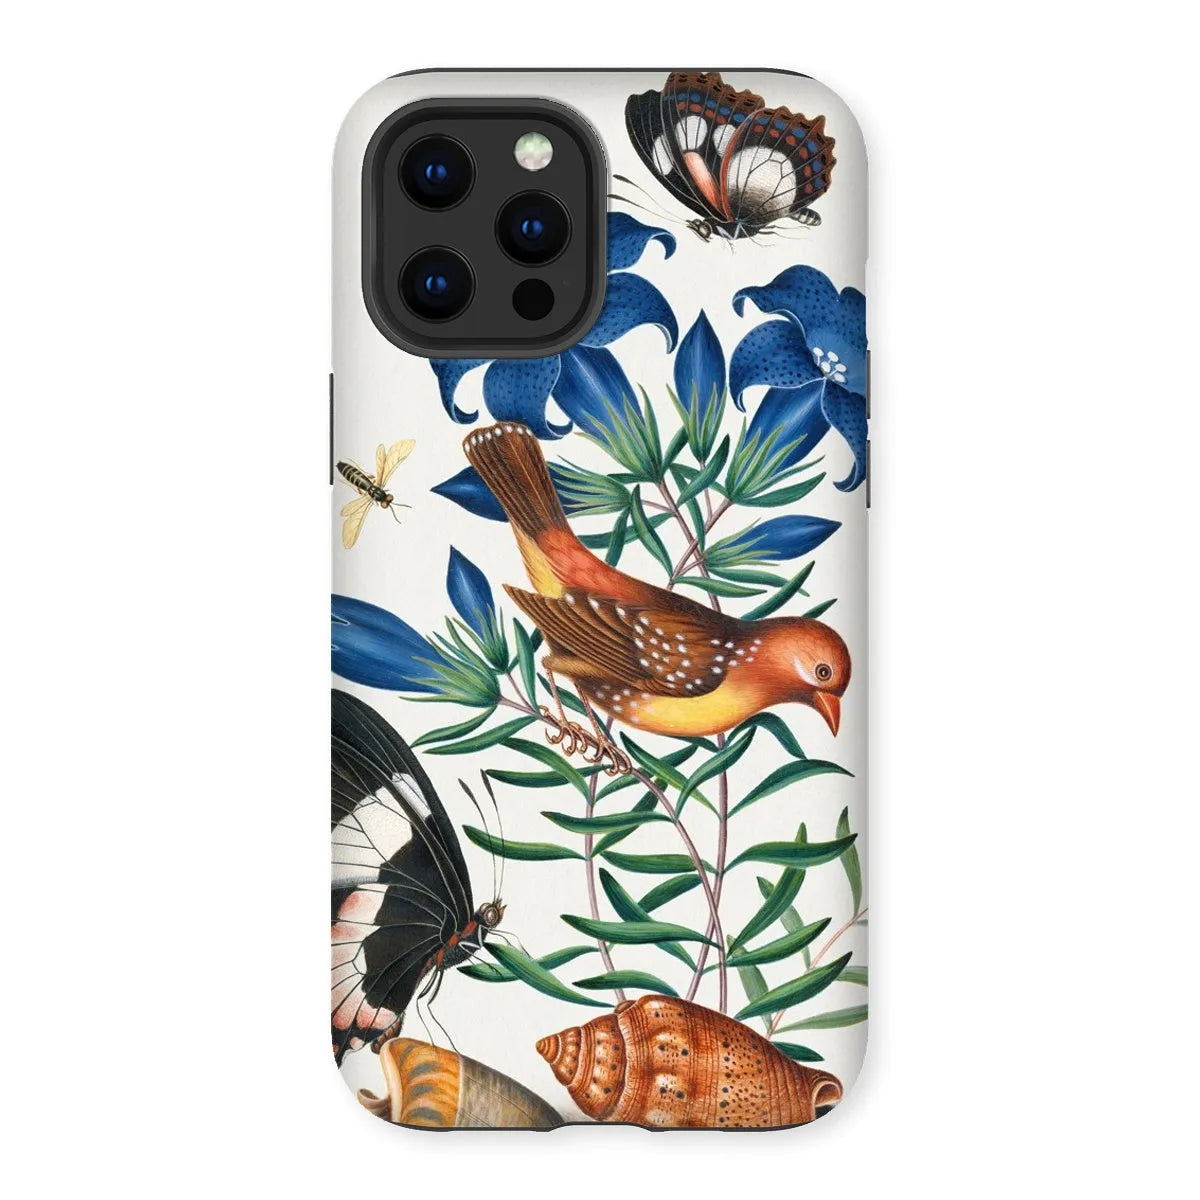 Avadavat Gentian Sawfly Swallowtail And Shells Phone Case - James Bolton - Iphone 12 Pro Max / Matte - Mobile Phone